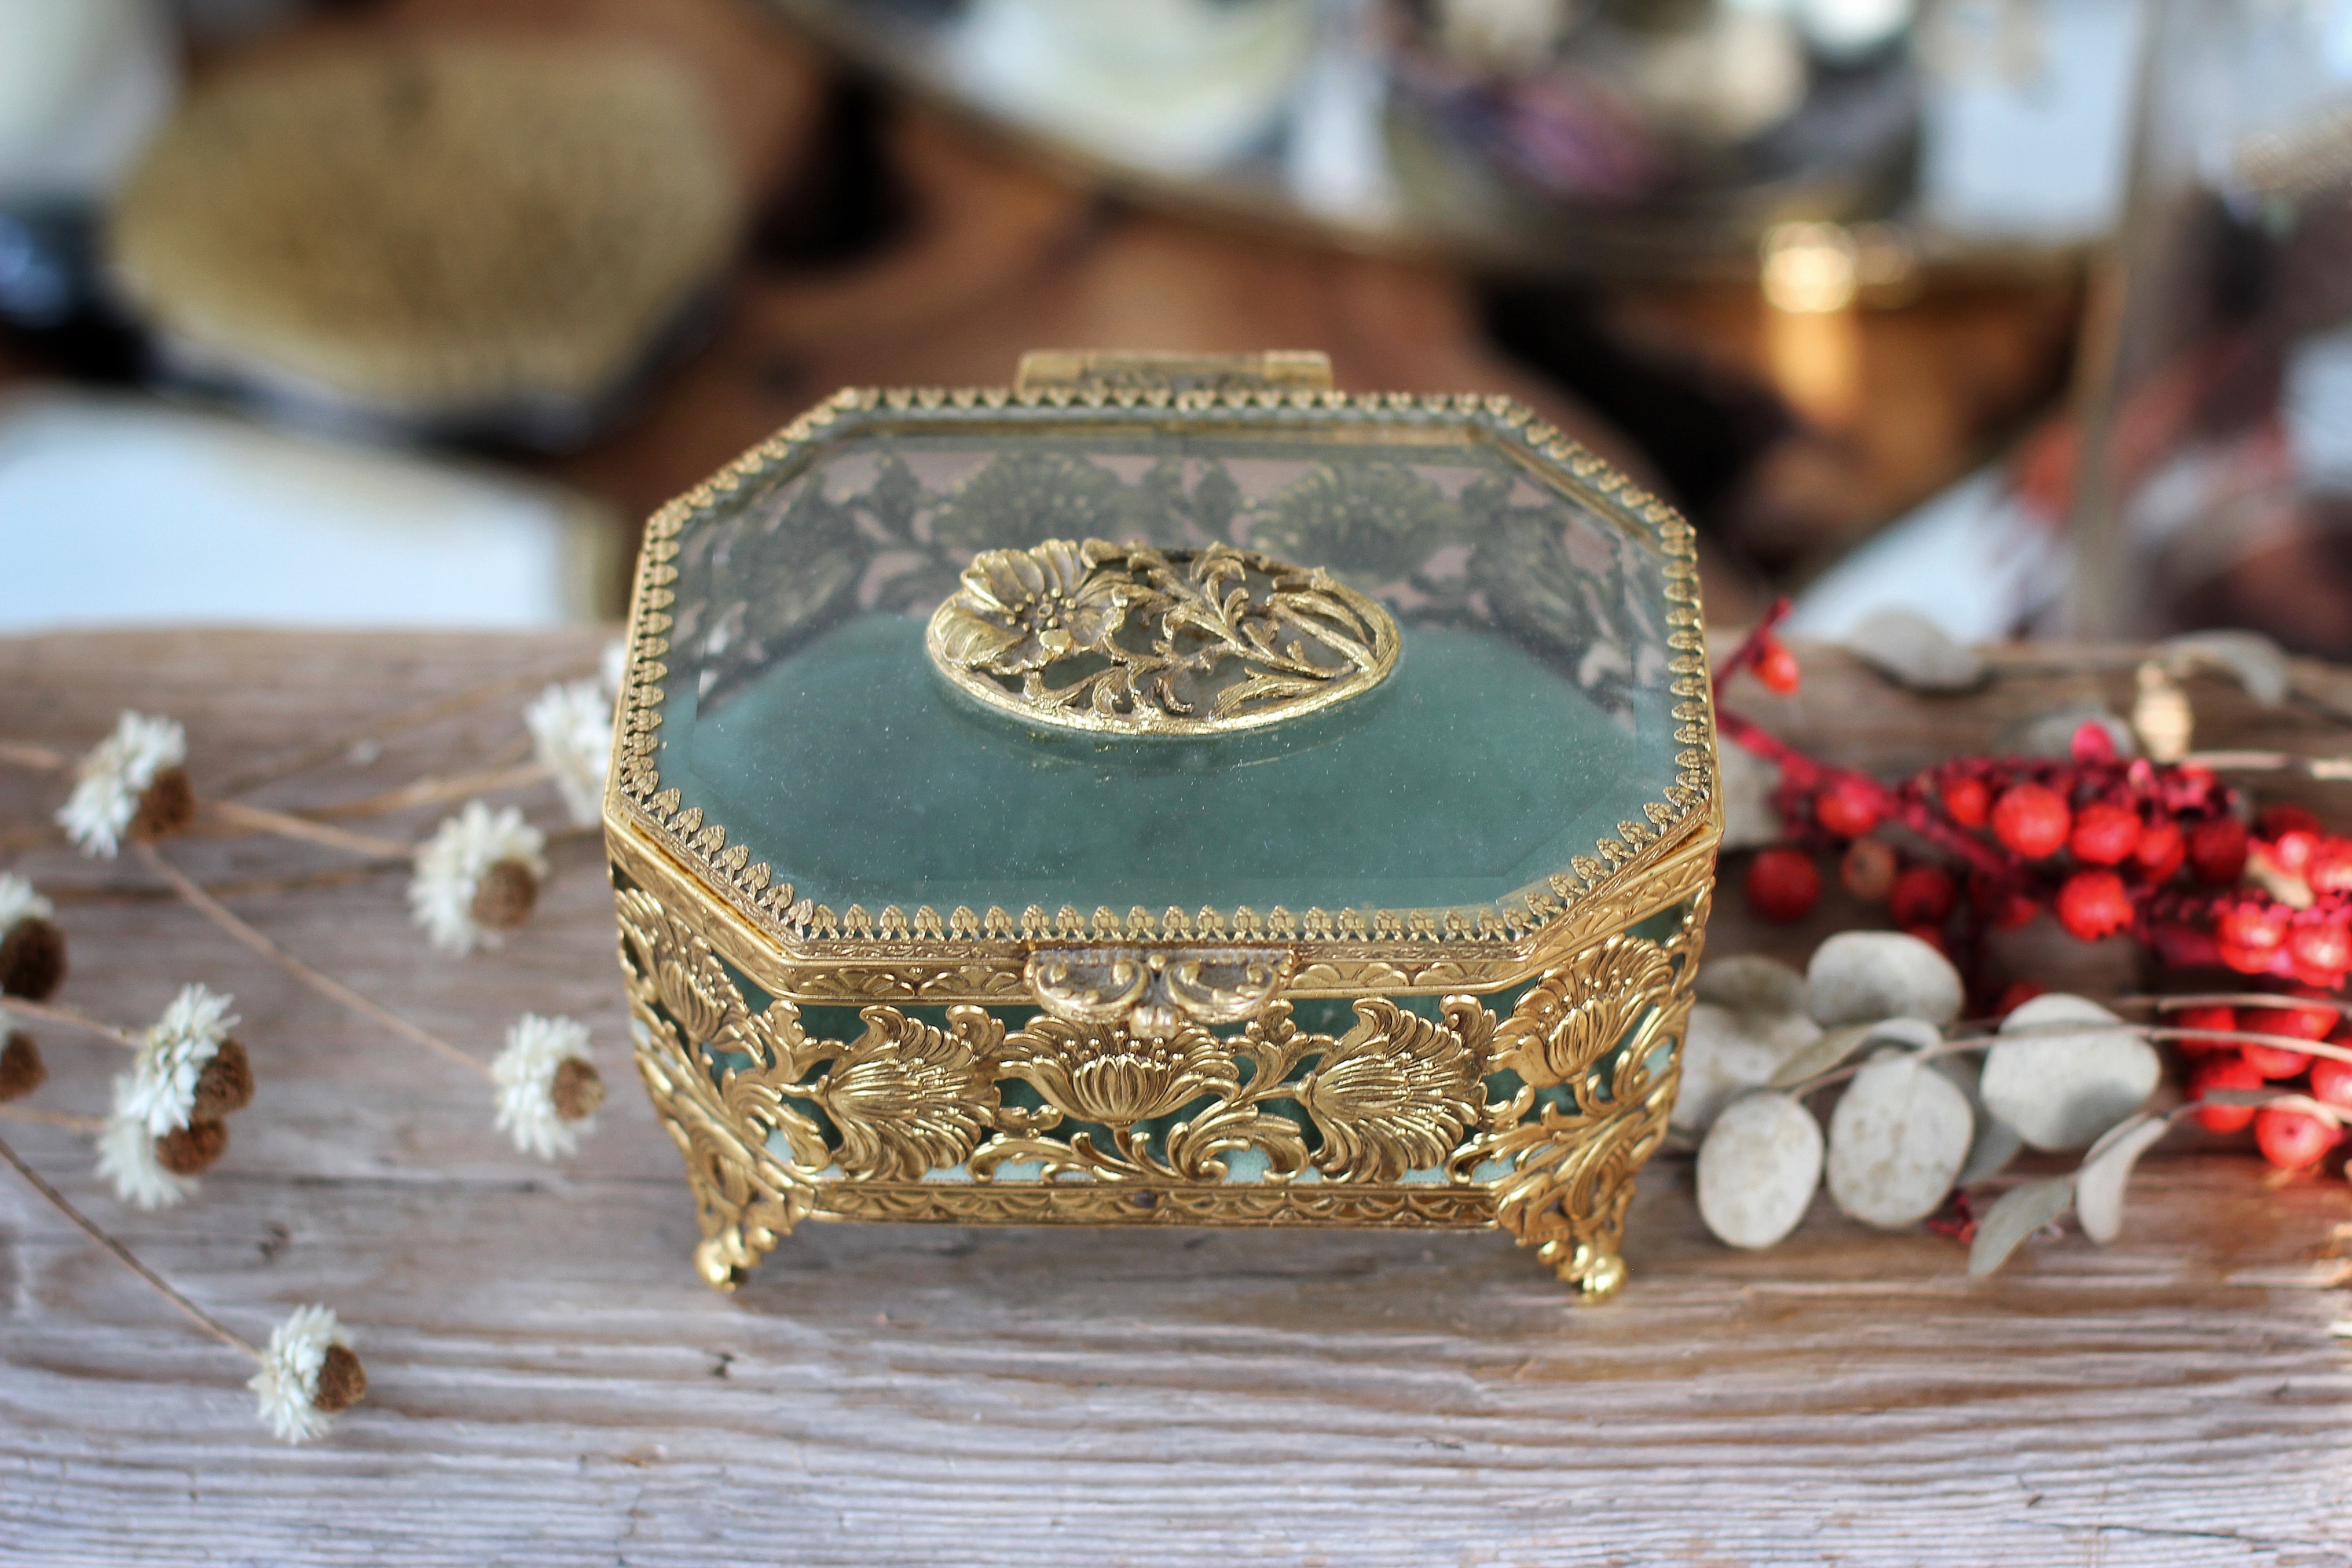 Antique Turquoise Floral Dogwood Jewelry Box